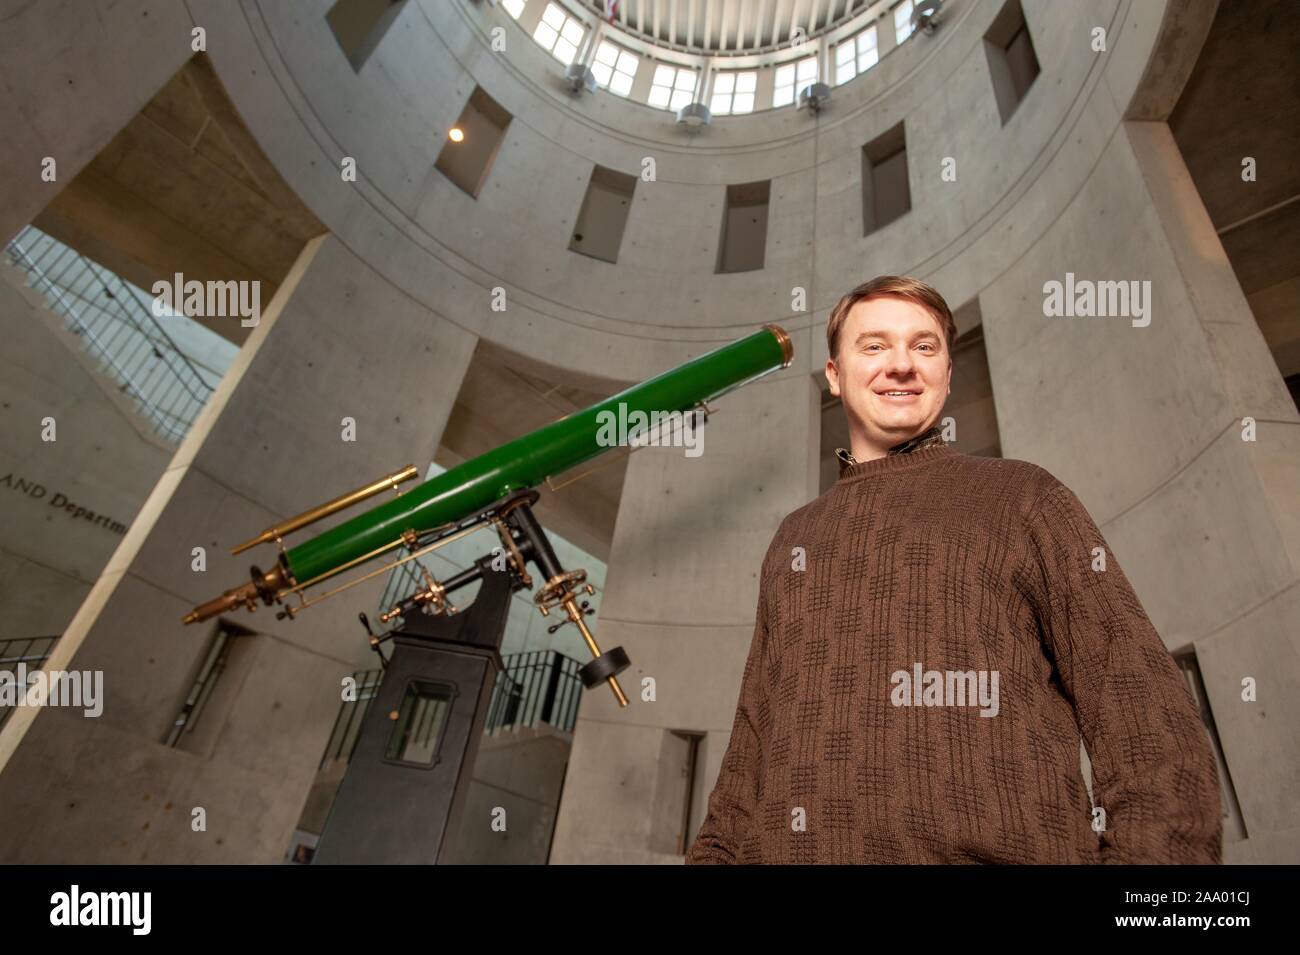 Low-angle shot of David Thilker, a Principal Research Scientist in the Henry A Rowland Department of Physics and Astronomy, standing in an observatory next to a telescope and smiling at the camera, at the Johns Hopkins University, Baltimore, Maryland, February 13, 2009. From the Homewood Photography Collection. () Stock Photo